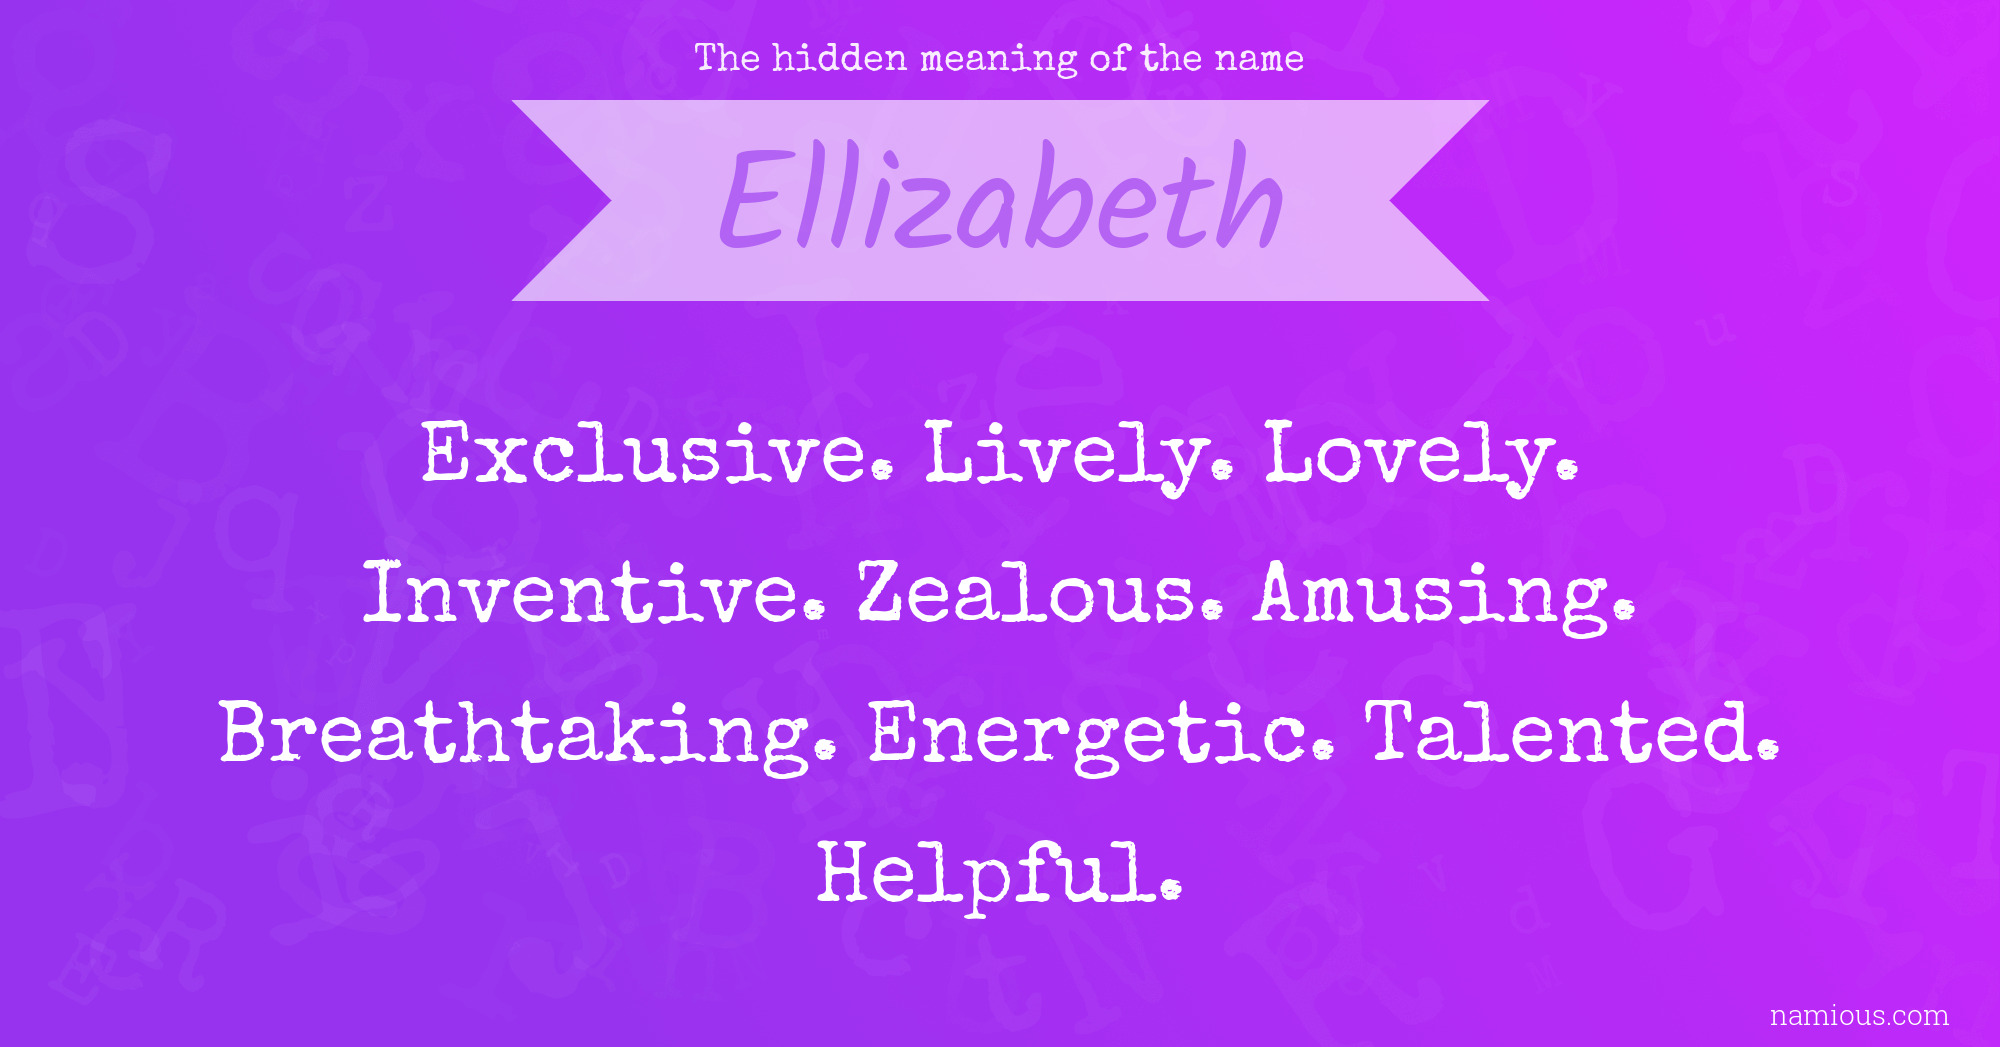 The hidden meaning of the name Ellizabeth